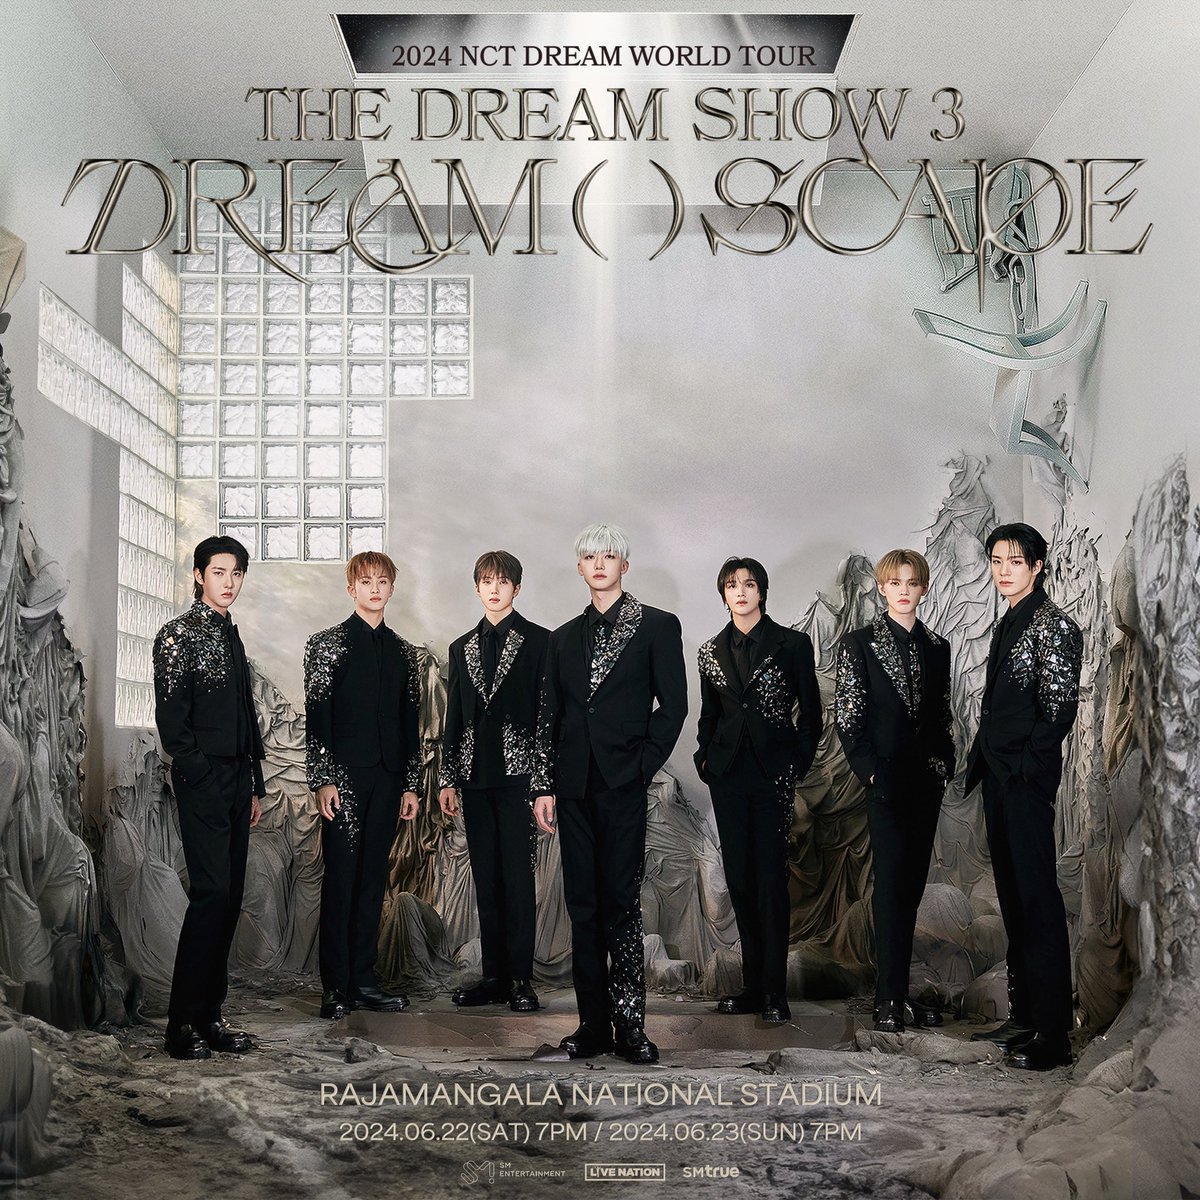 NCT DREAM WORLD TOUR <THE DREAM SHOW 3 : DREAM( )SCAPE> in BANGKOK   〖 RAJAMANGALA NATIONAL STADIUM 〗 ➫ 2024.06.22 7PM (ICT) ➫ 2024.06.23 7PM (ICT)   〖 TICKET SALES 〗 ➫ 2024.04.26 6PM-9:59PM (ICT) *PRESALE ➫ 2024.04.27 11AM~(ICT) ➫🔗 NCTDREAM-THEDREAMSHOW.com   #NCTDREAM…